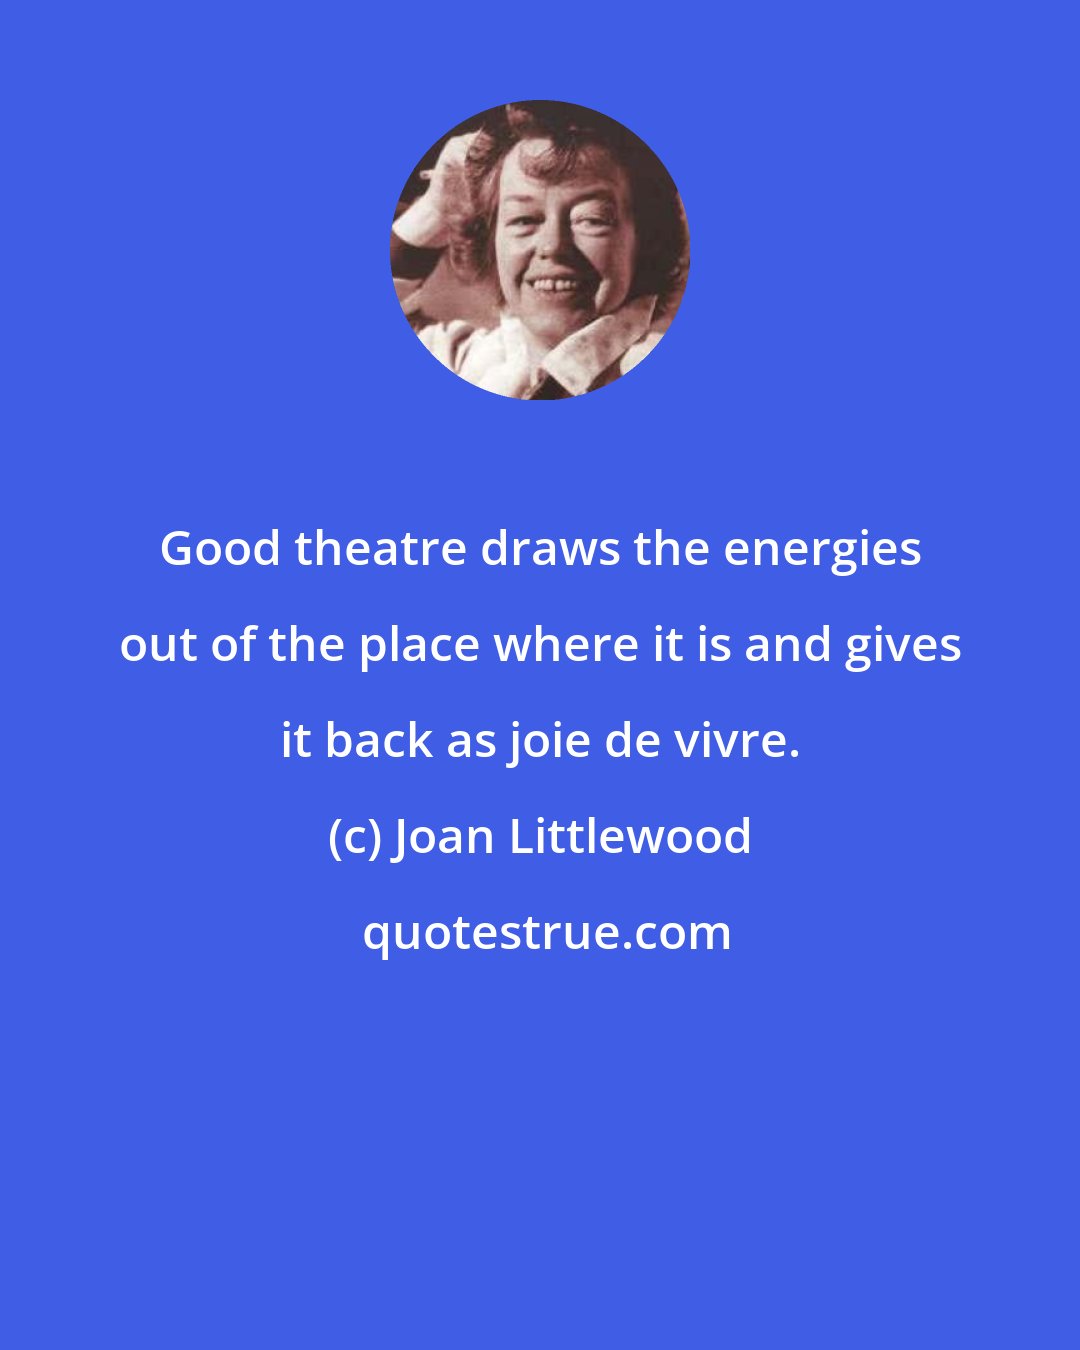 Joan Littlewood: Good theatre draws the energies out of the place where it is and gives it back as joie de vivre.